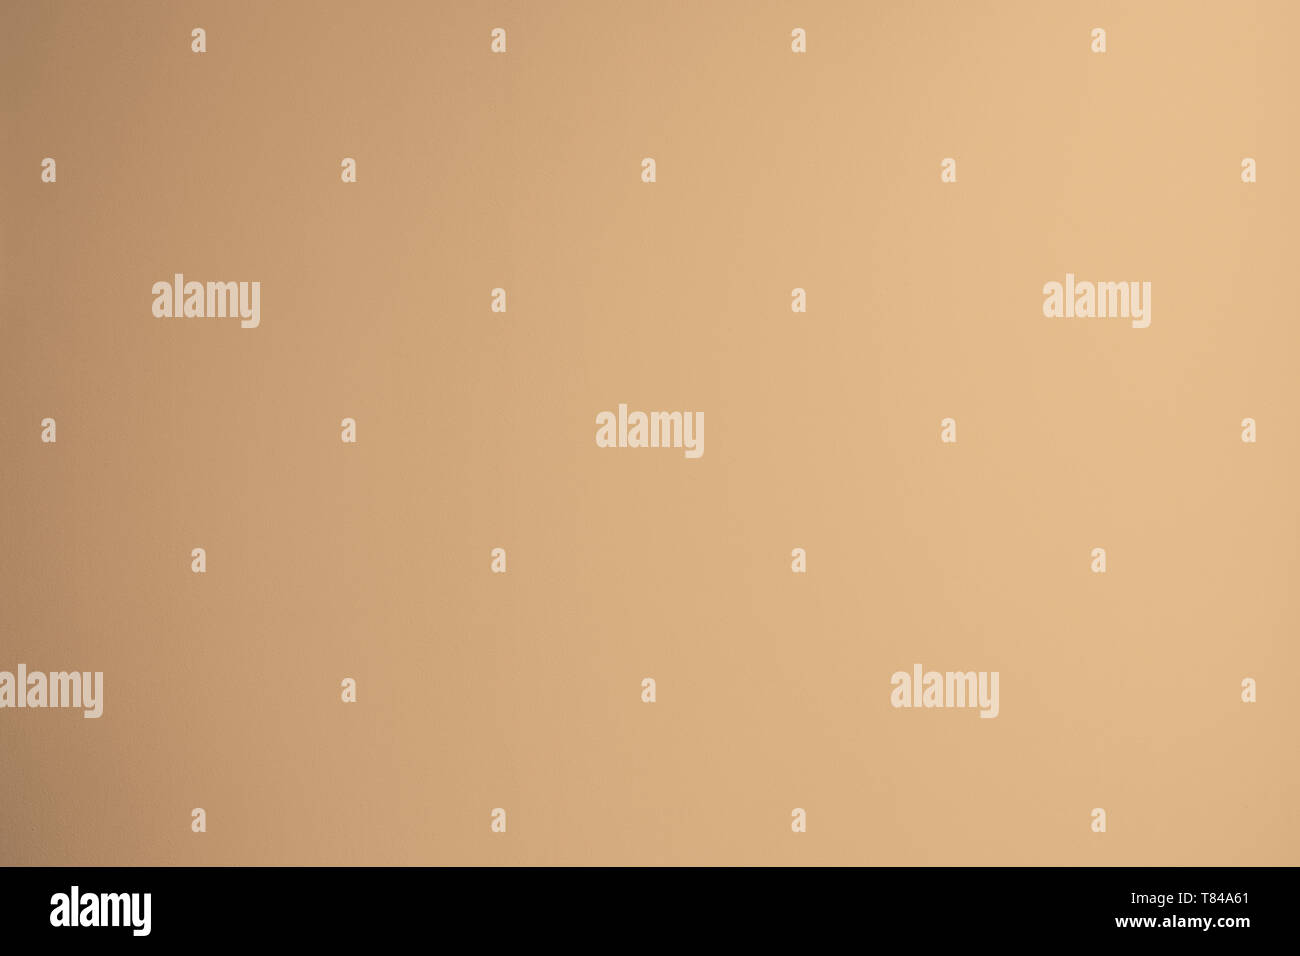 Soft Creme Color Texture Background In Light Beige Tone With Vignette